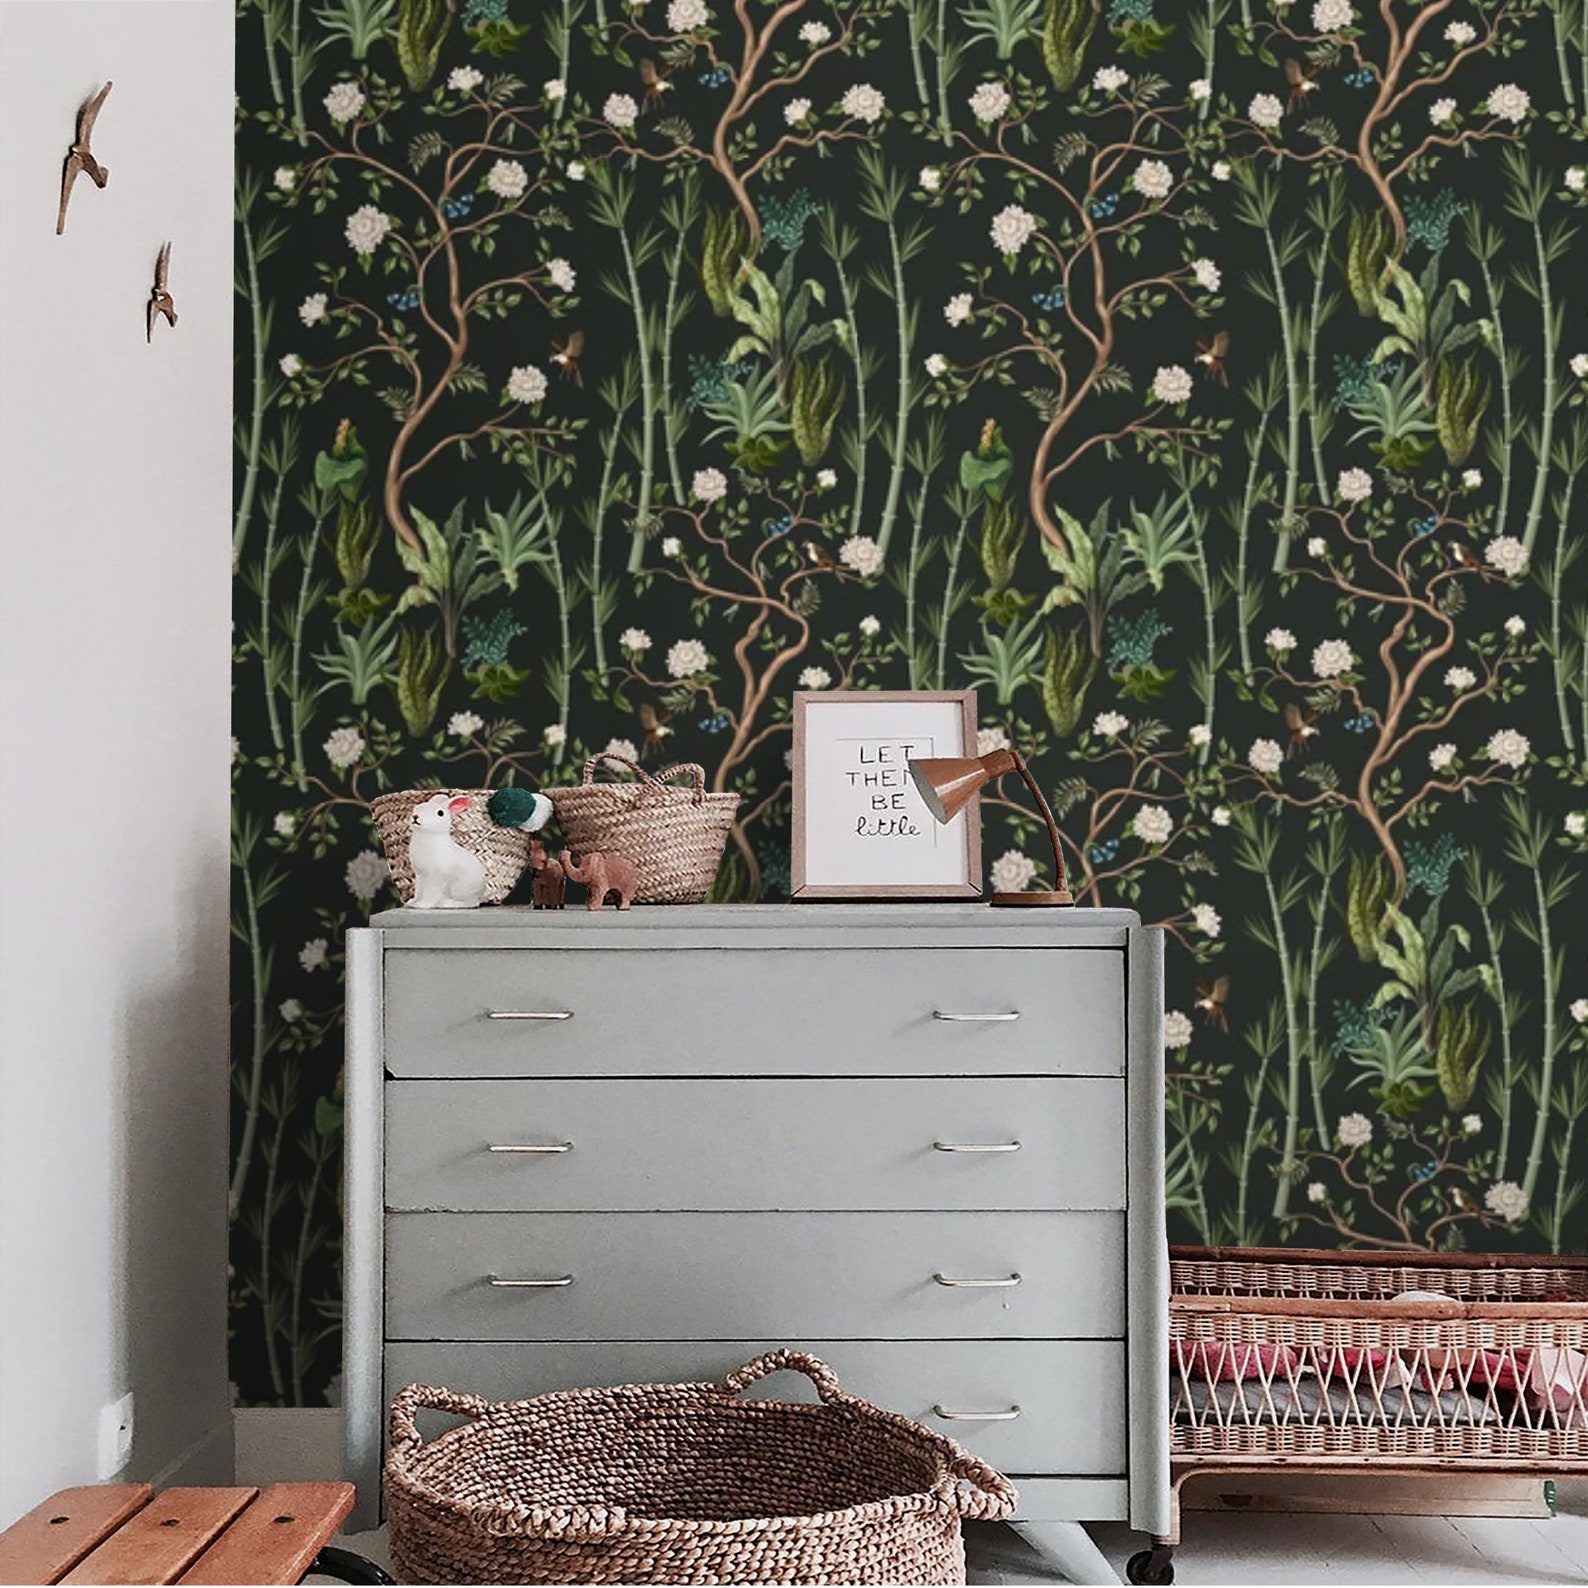 Dark Botanical Wallpaper Flowers and Leaves Peel and Stick - Etsy